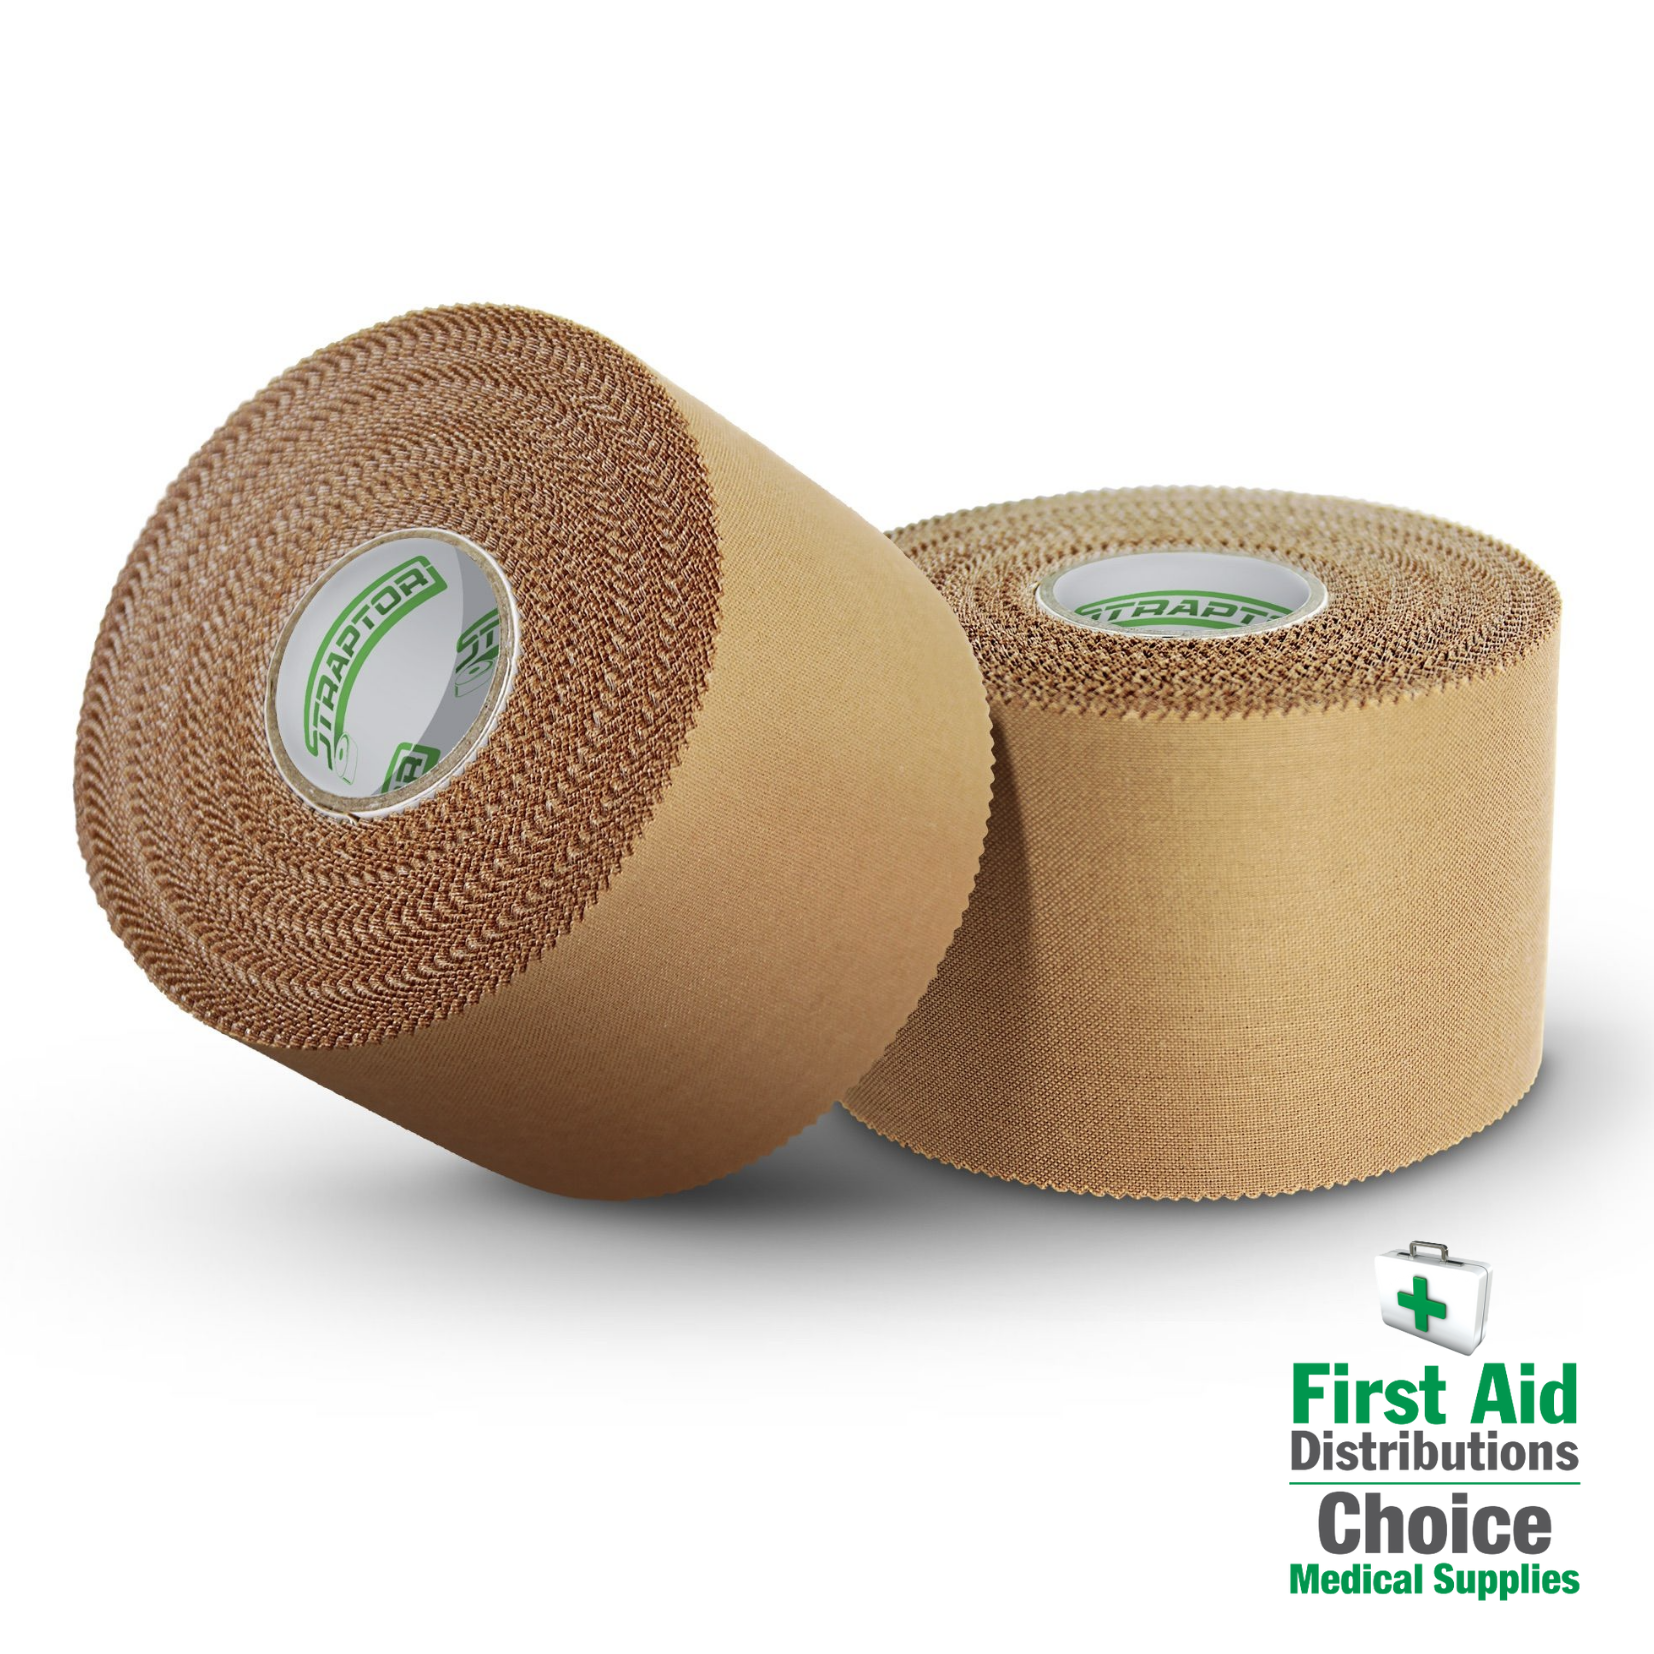 collections/Rigid_Strapping_Tape_First_Aid_Distributions_1.png